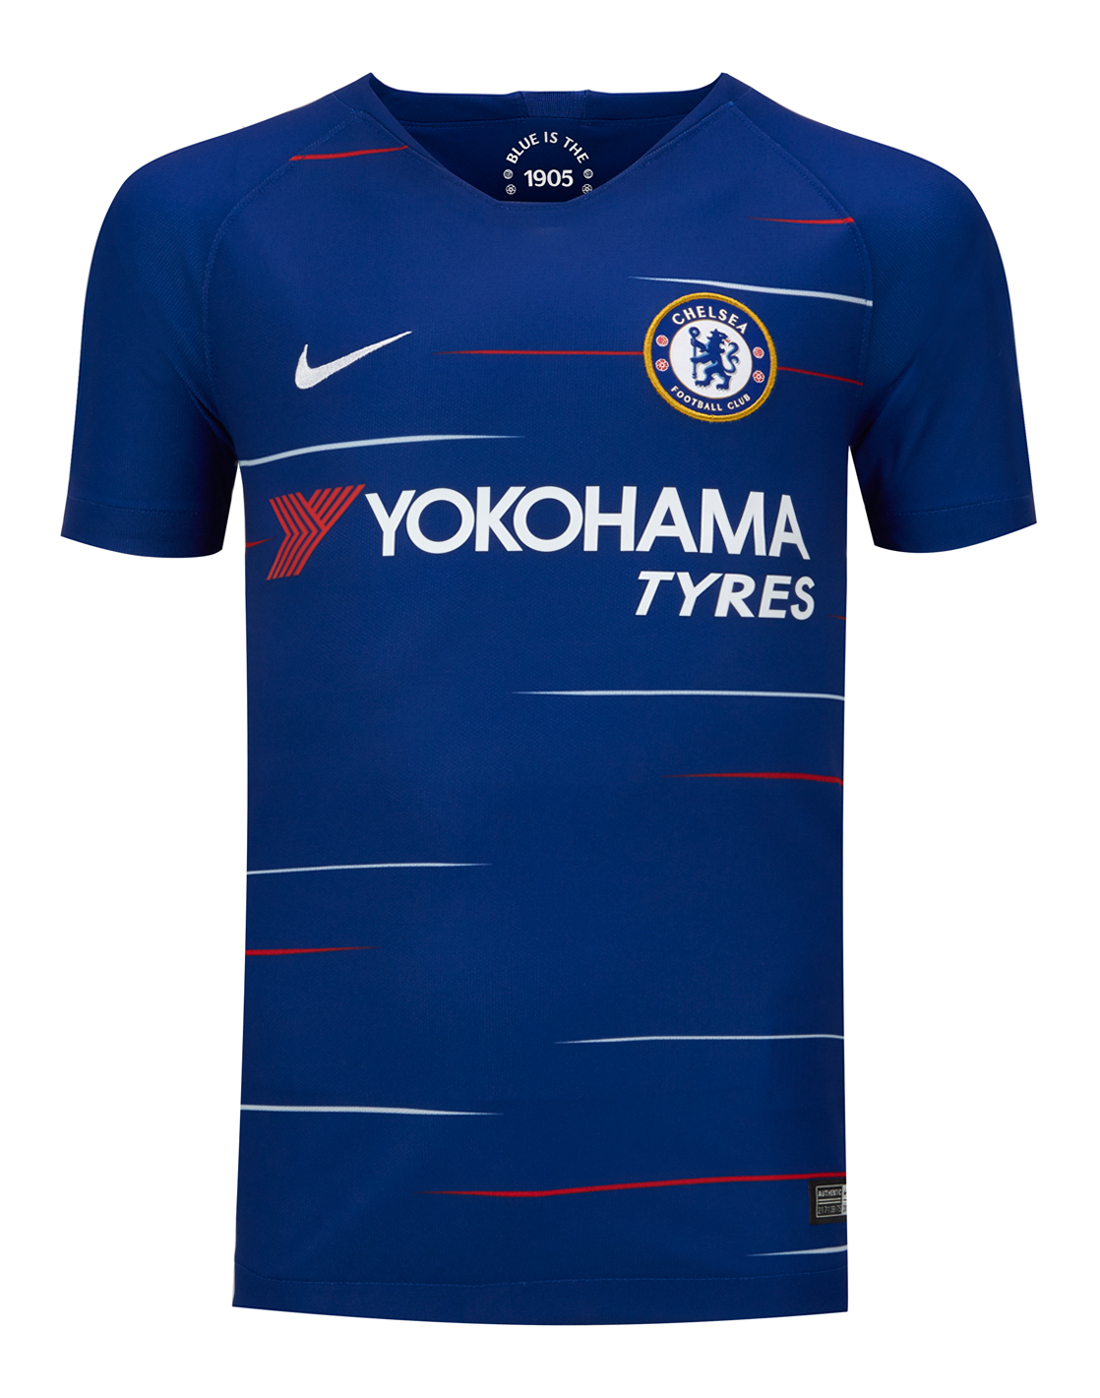 Chelsea 18/19 Home Shirt | Life Style Sports